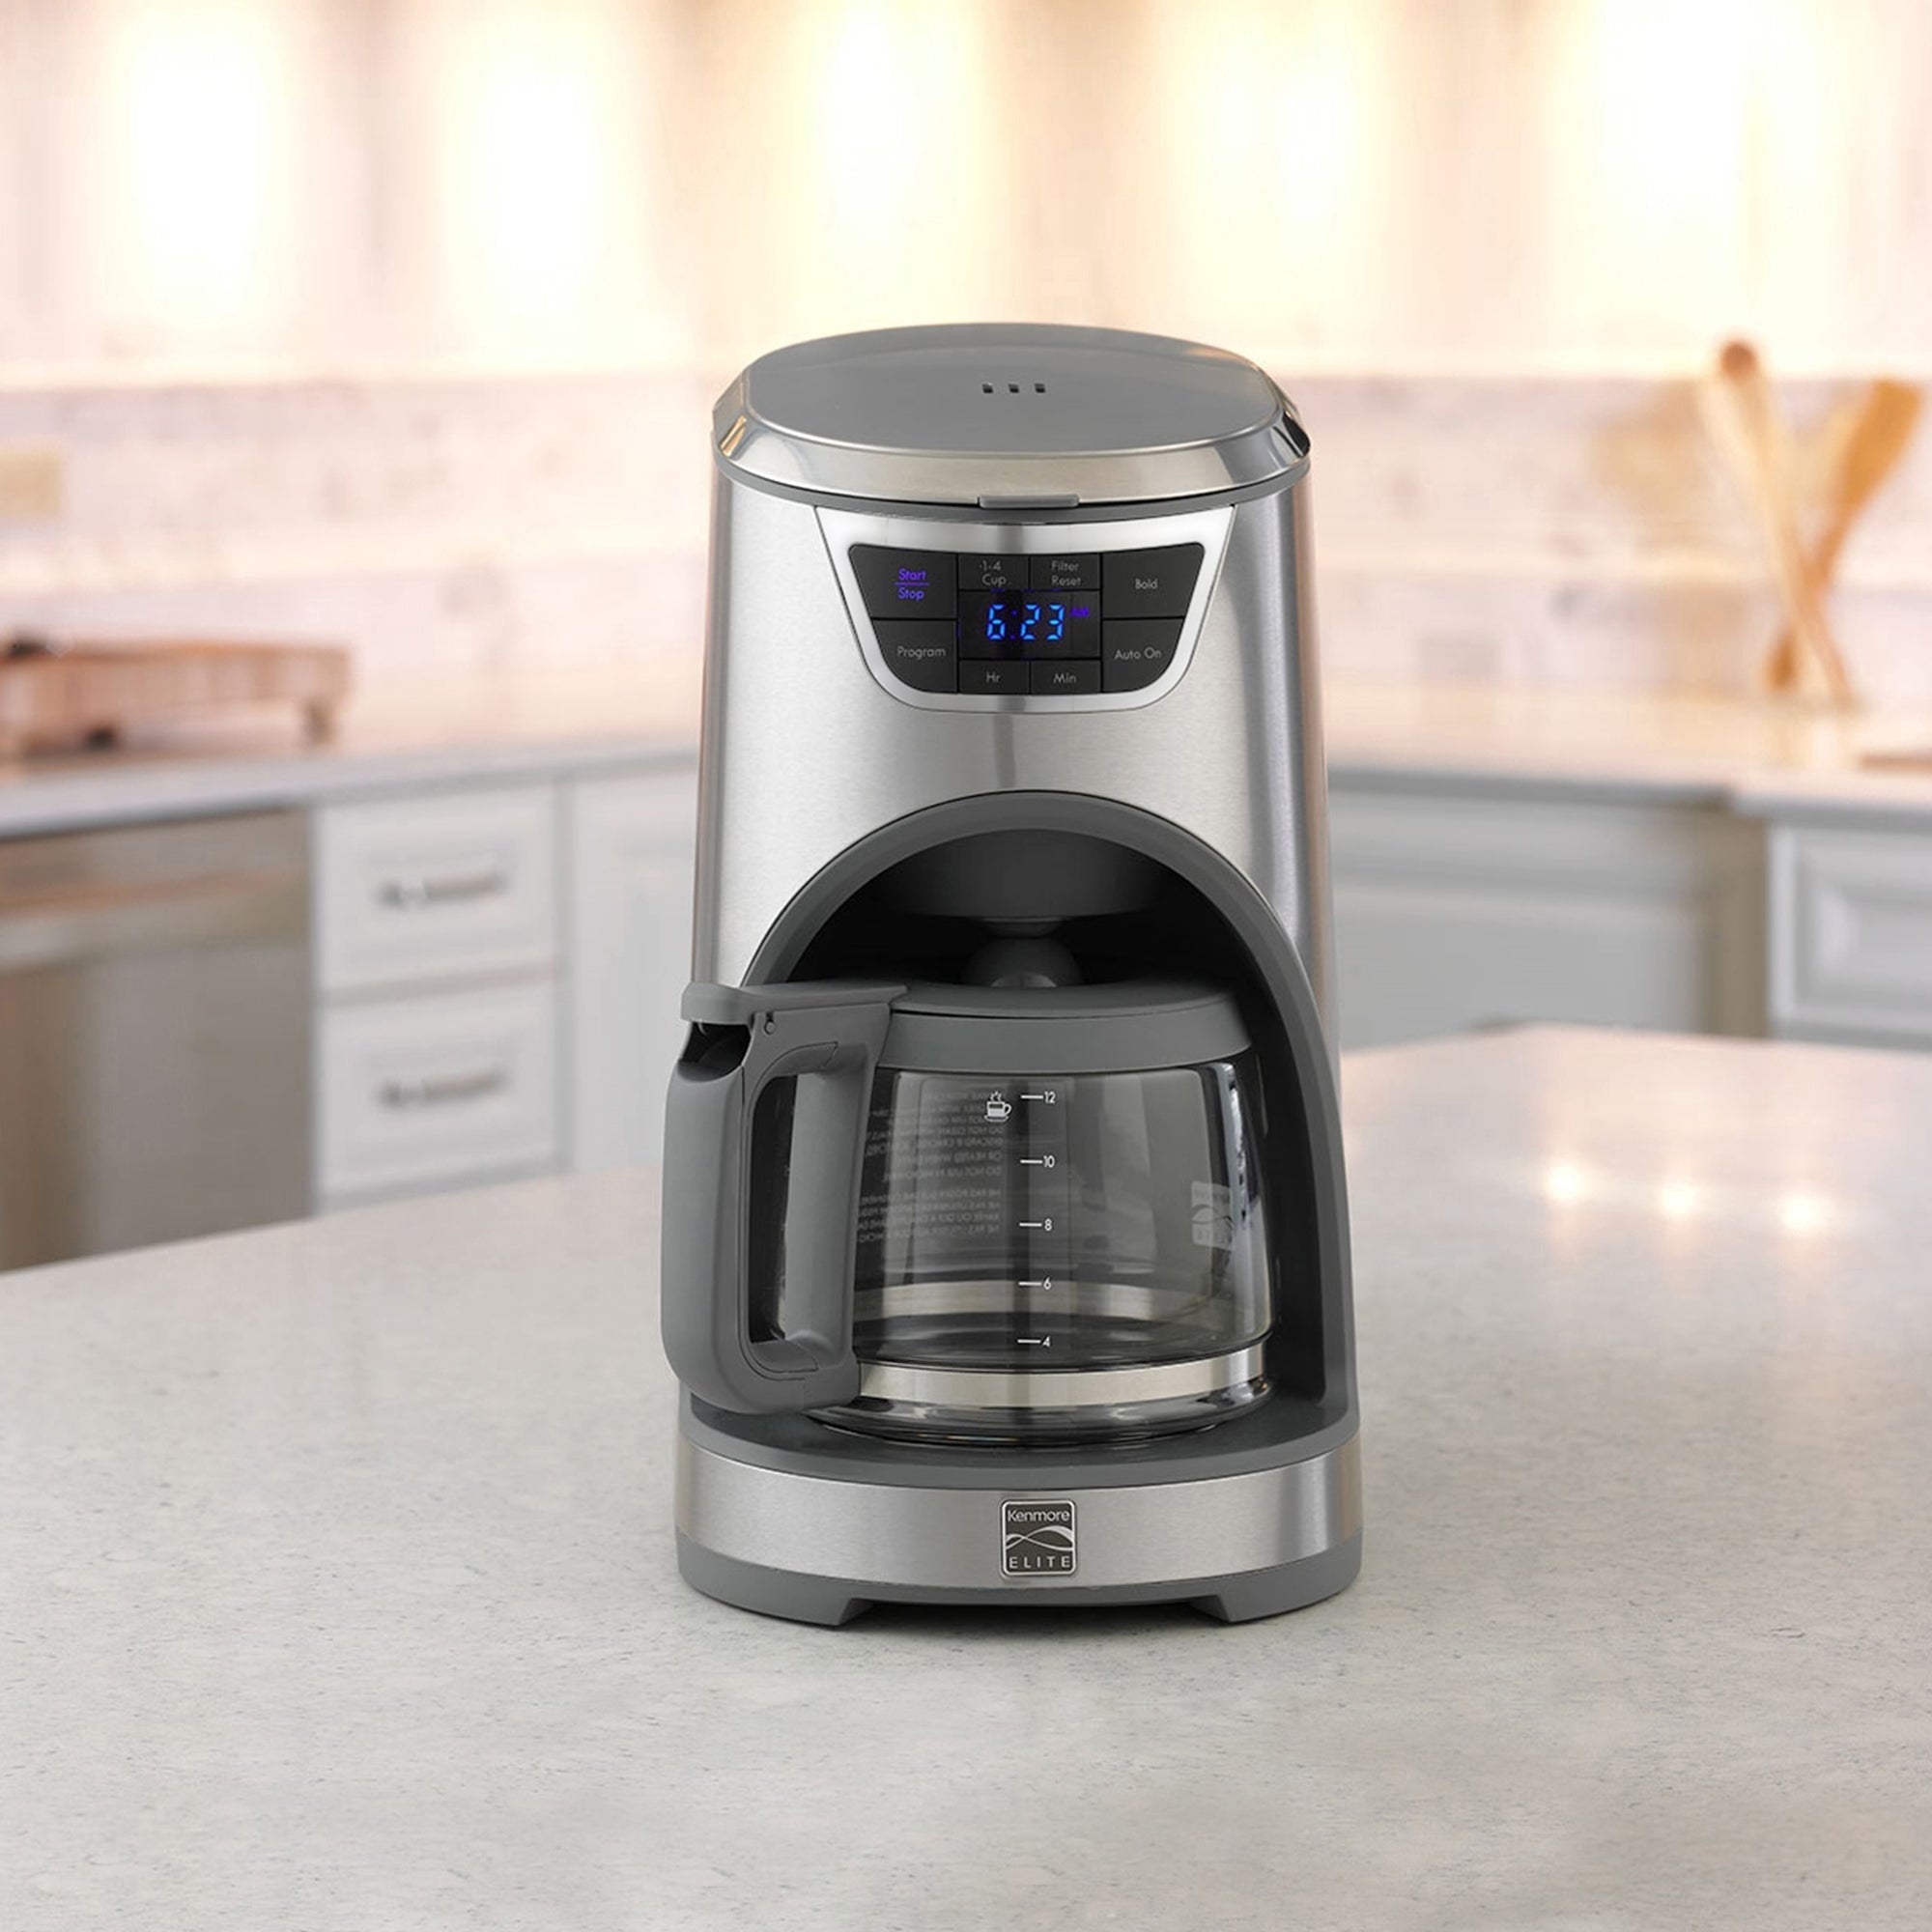 Lifestyle image of Kenmore Elite 12 cup programmable coffeemaker on a light gray countertop with white cupboards and drawers and stainless steel appliances in the background